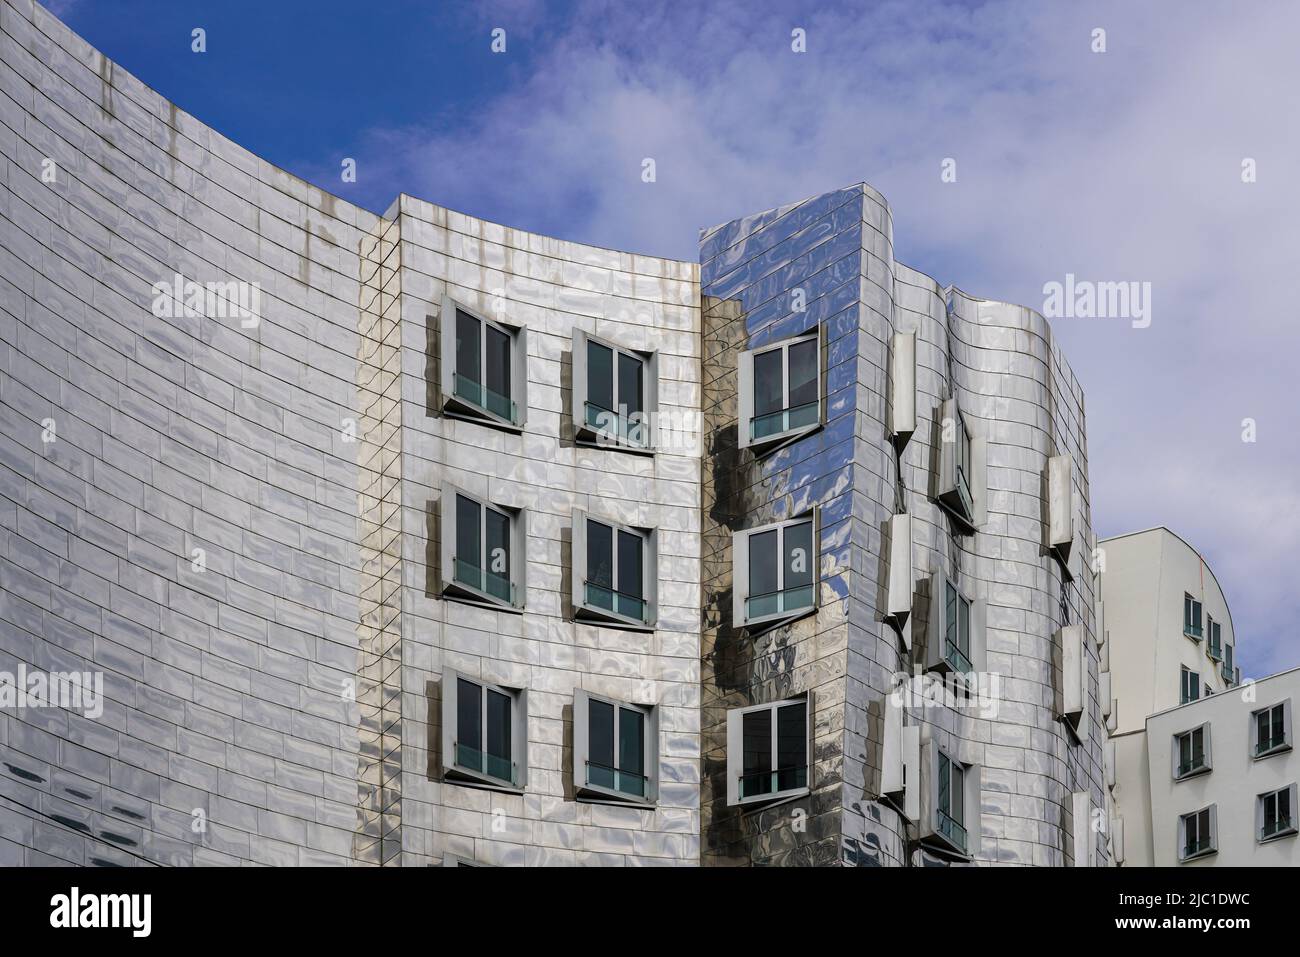 House B by architect Frank O. Gehry in the Media Harbor with an undulating stainless steel facade Düsseldorf, North Rhine-Westphalia, Germany, 23.5.22 Stock Photo